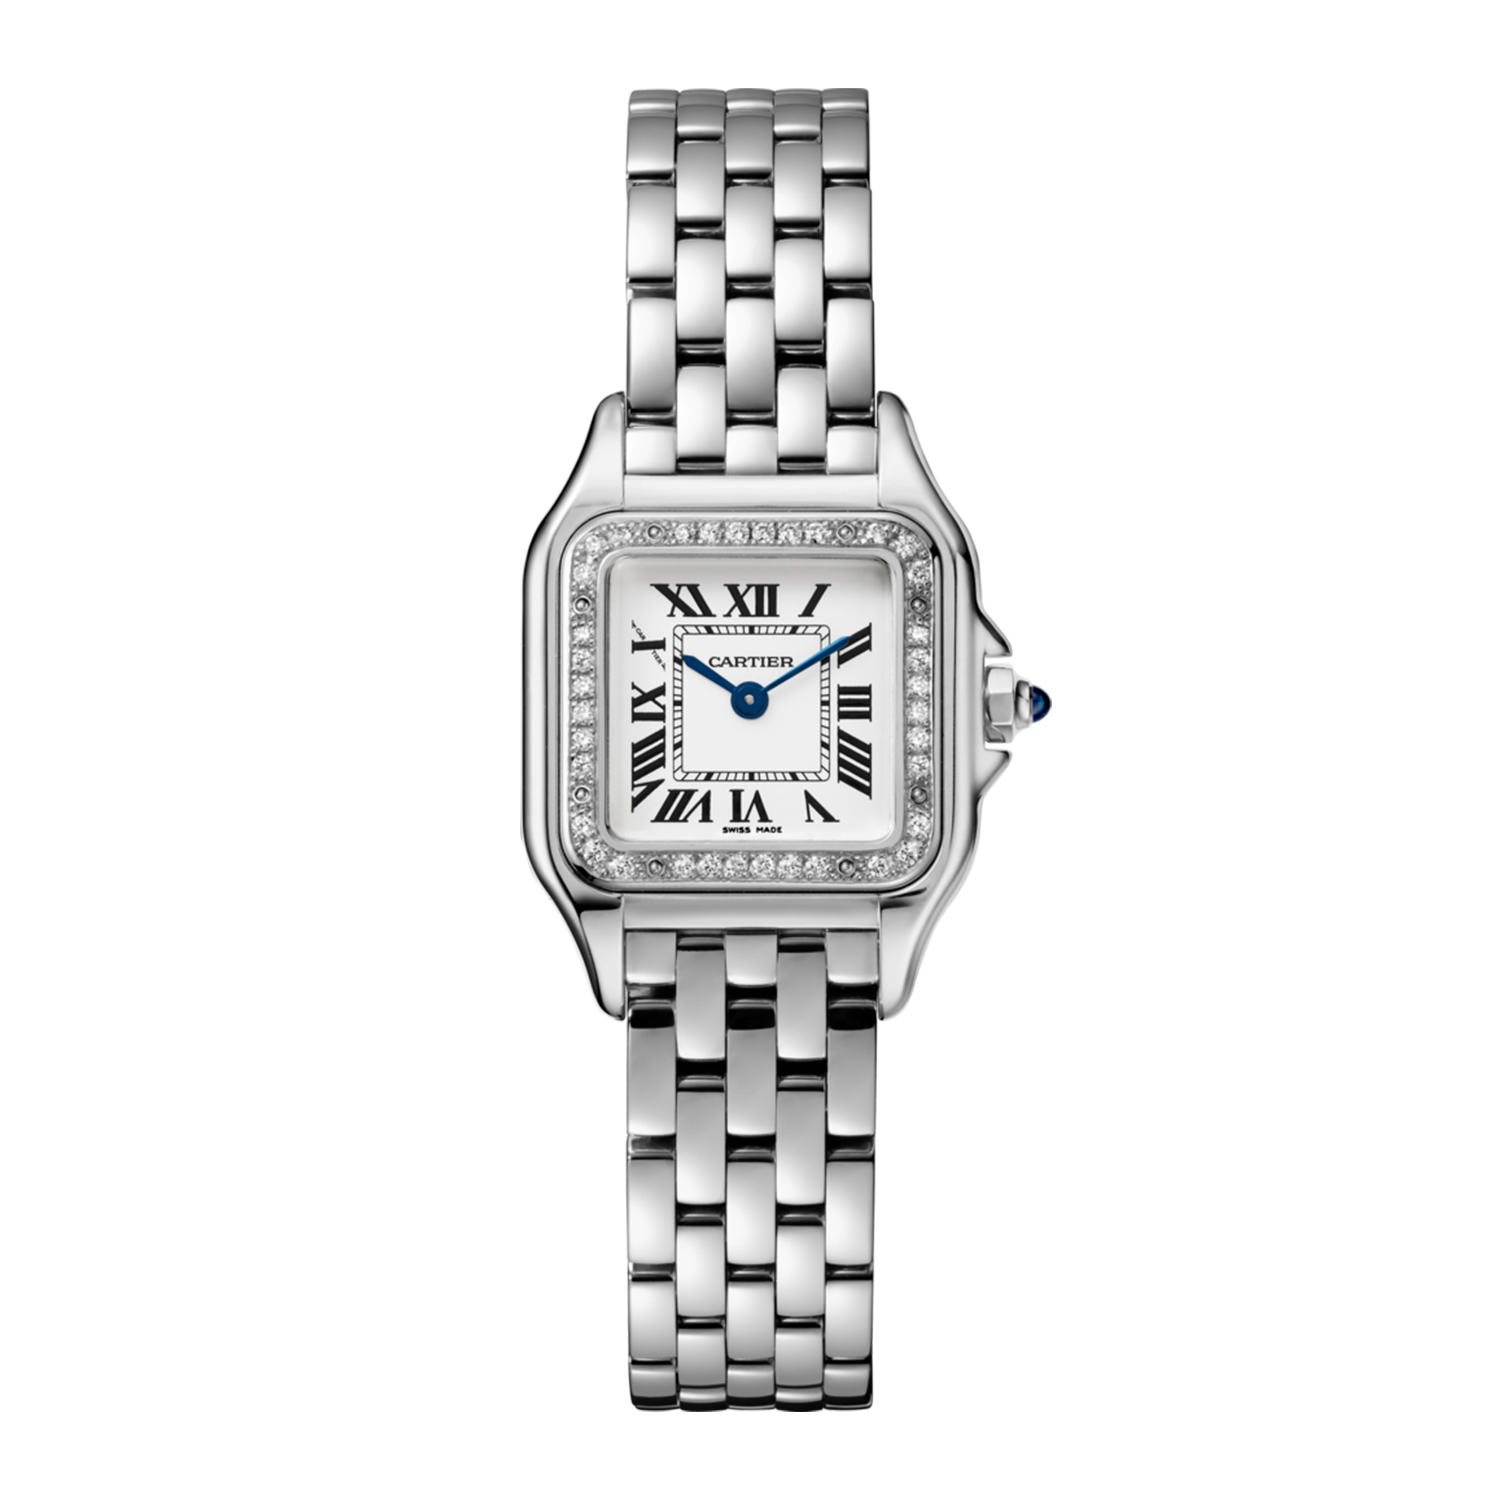 Panthere De Cartier Watch with Diamond Case, Small 0